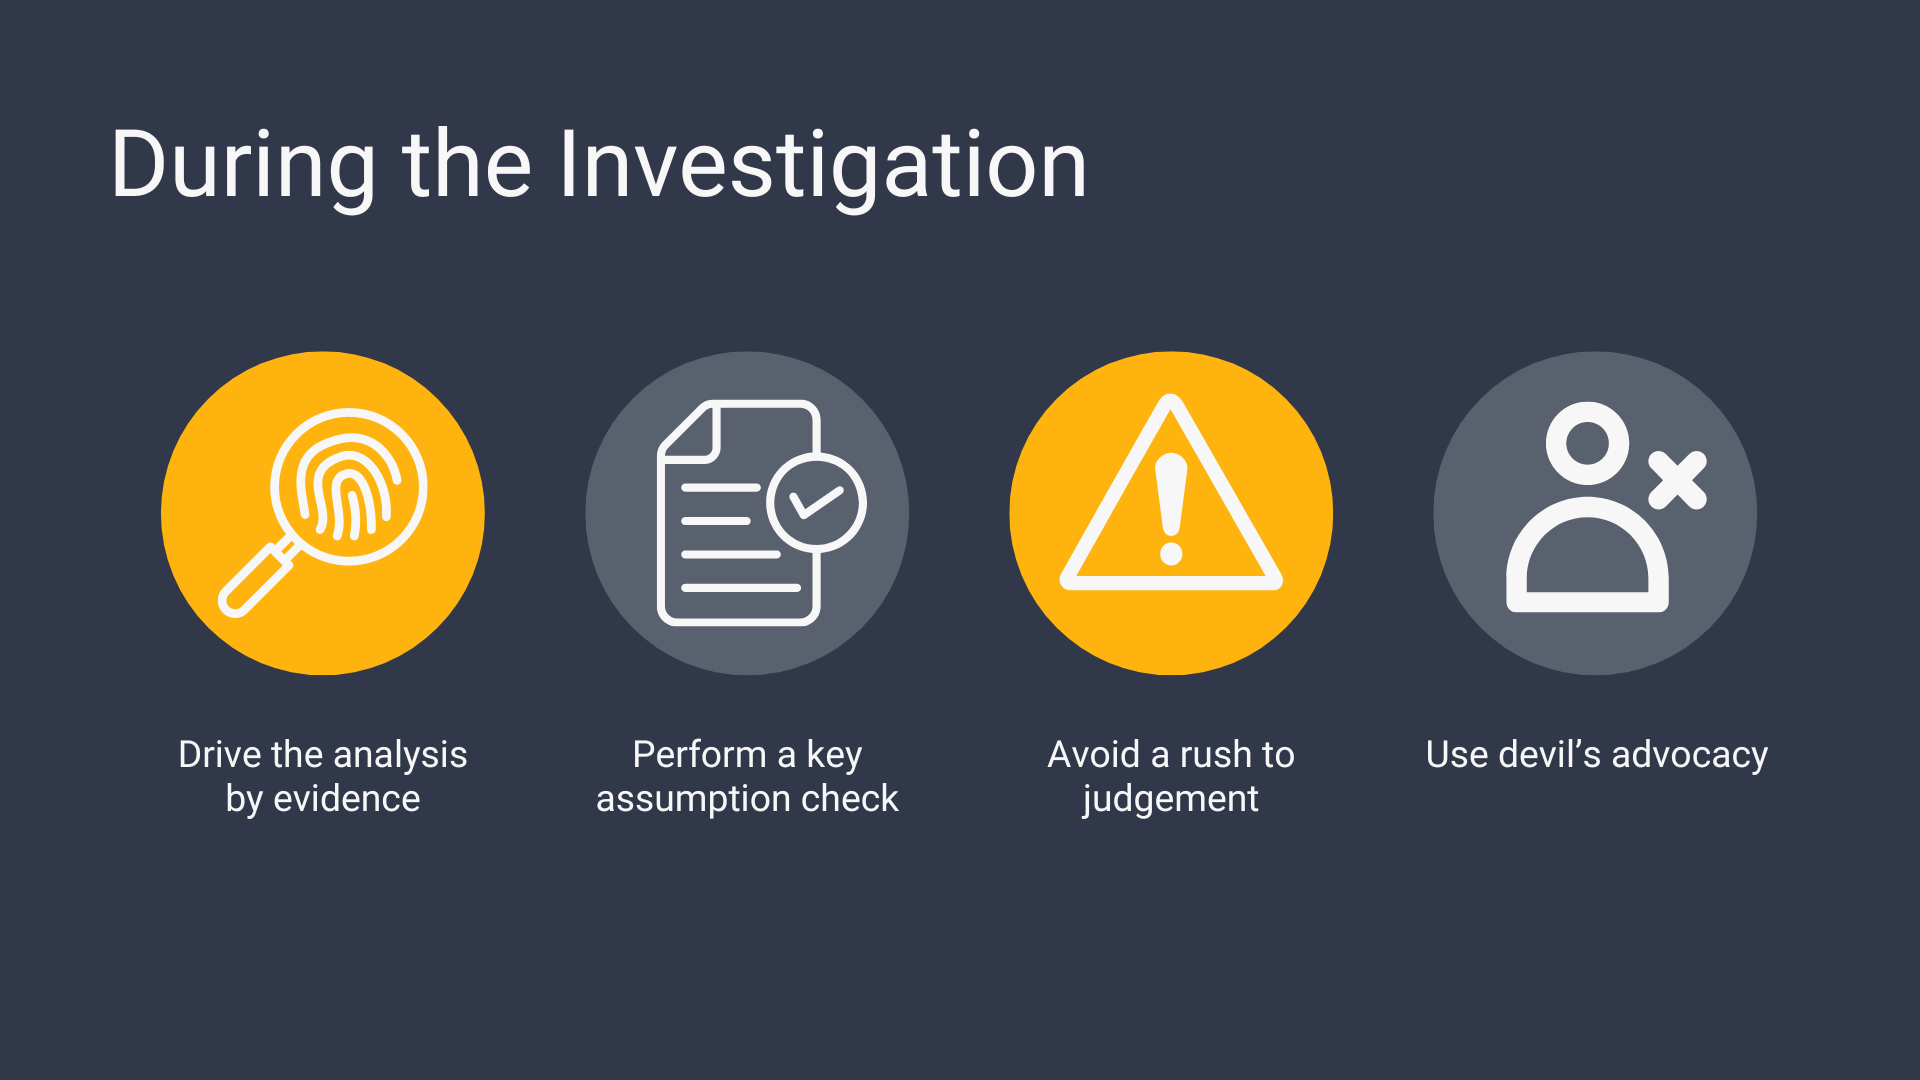 Four principles to keep in mind to guide your investigations